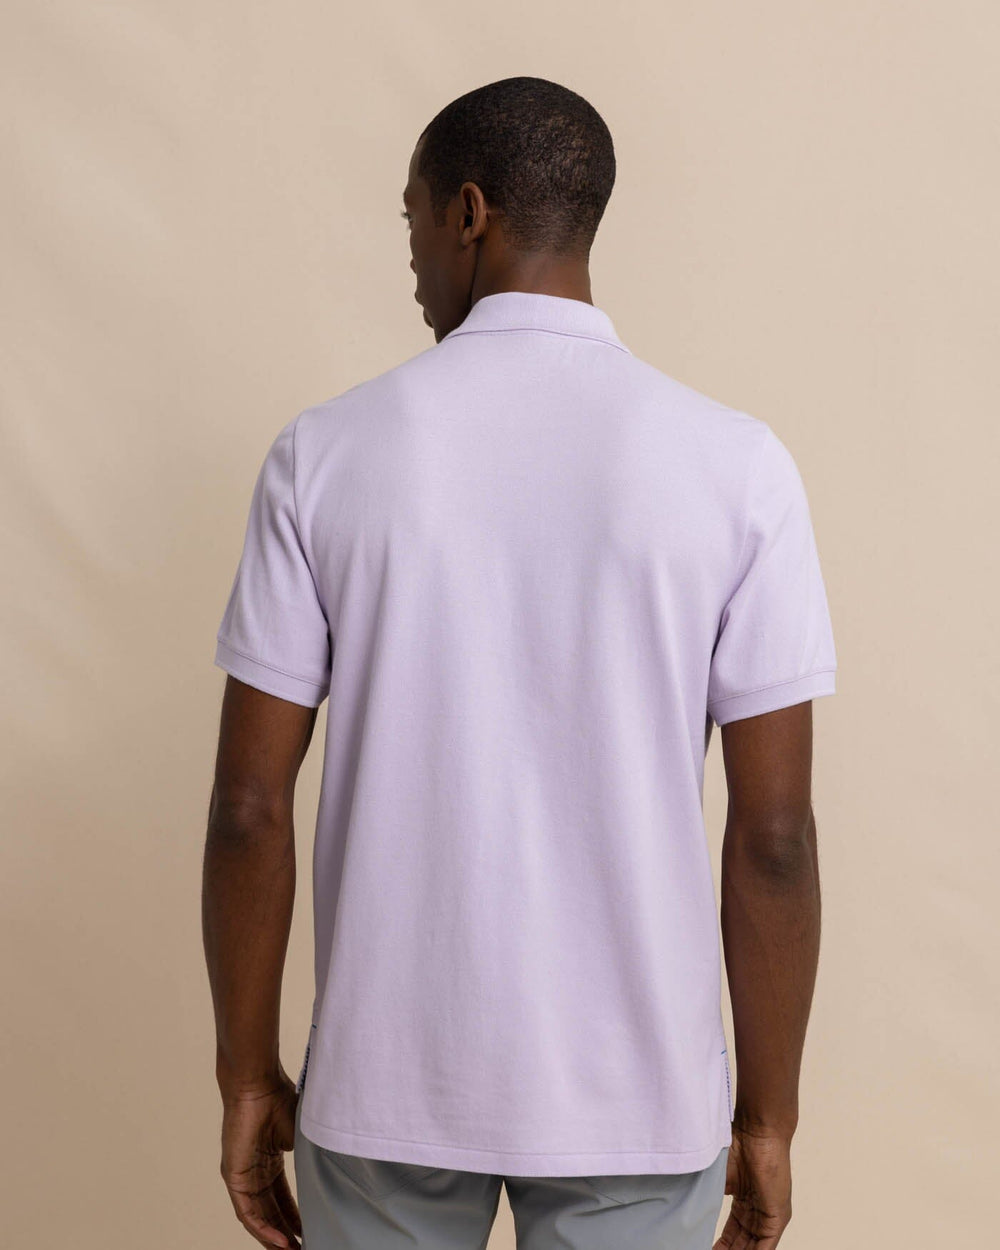 The back view of the Southern Tide new-skipjack-polo-shirt by Southern Tide - Orchid Petal